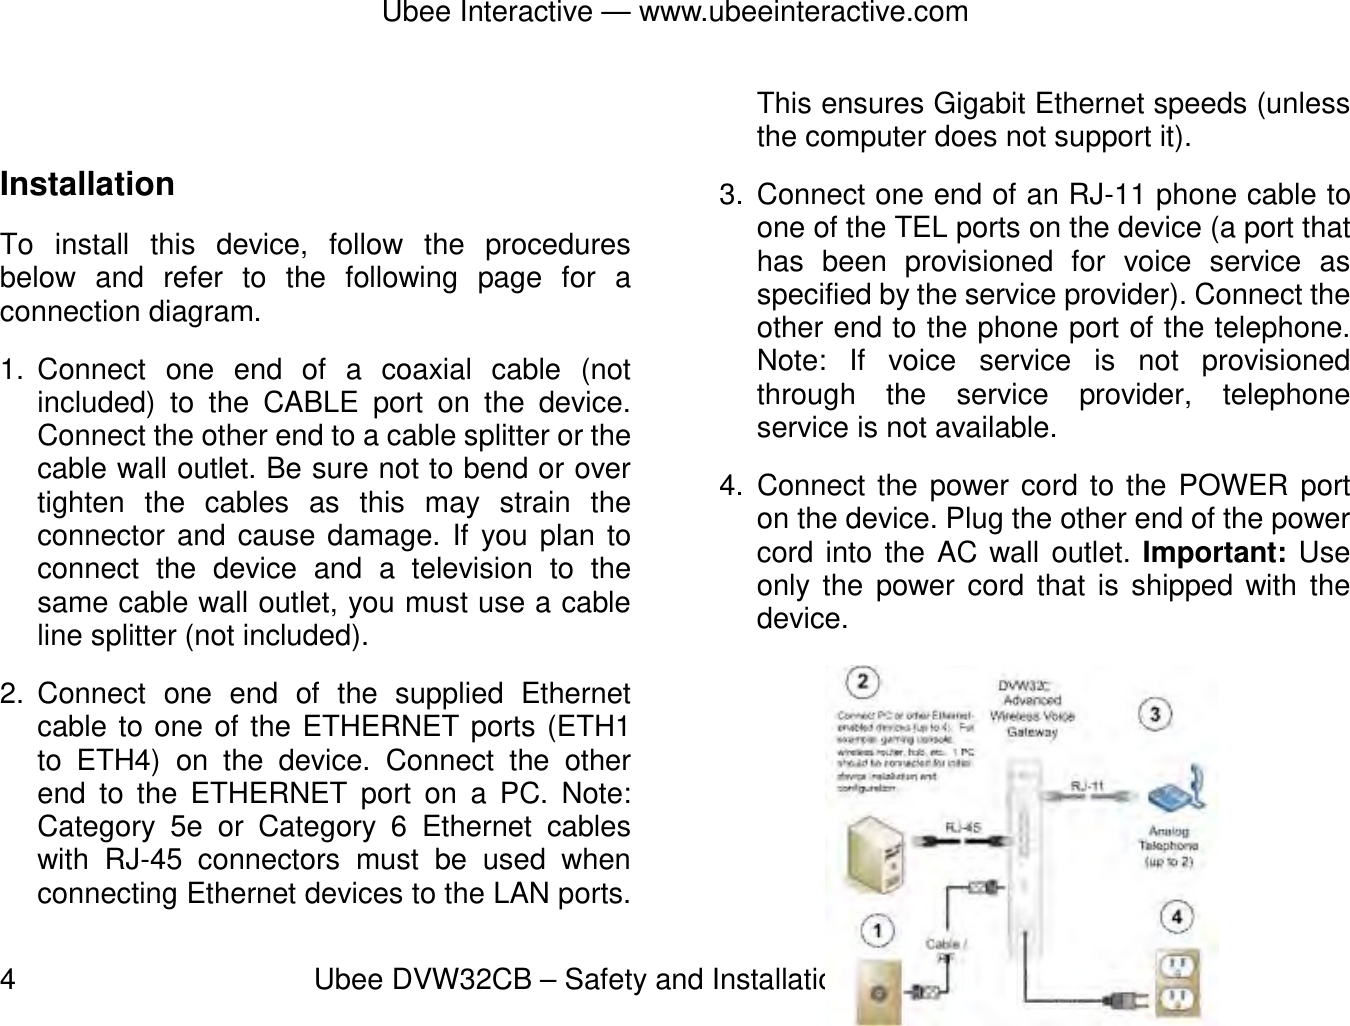 Ubee Interactive — www.ubeeinteractive.com 4          Ubee DVW32CB – Safety and Installation Product Insert v1.0  Installation To install this device, follow the procedures below and refer to the following page for a connection diagram. 1. Connect  one  end  of  a coaxial cable (not included) to the CABLE port on the device. Connect the other end to a cable splitter or the cable wall outlet. Be sure not to bend or over tighten the cables as this may strain the connector and cause damage. If you plan to connect the device and a television to the same cable wall outlet, you must use a cable line splitter (not included). 2. Connect one end of the supplied Ethernet cable to one of the ETHERNET ports (ETH1 to ETH4) on the device. Connect the other end to the ETHERNET port on a PC. Note: Category 5e or Category 6 Ethernet cables with RJ-45 connectors must be used when connecting Ethernet devices to the LAN ports. This ensures Gigabit Ethernet speeds (unless the computer does not support it).   3. Connect one end of an RJ-11 phone cable to one of the TEL ports on the device (a port that has been provisioned for voice service as specified by the service provider). Connect the other end to the phone port of the telephone. Note: If voice service is not provisioned through the service provider, telephone service is not available. 4. Connect the power cord to the POWER port on the device. Plug the other end of the power cord into the AC wall outlet. Important: Use only the power cord that is shipped with the device.    